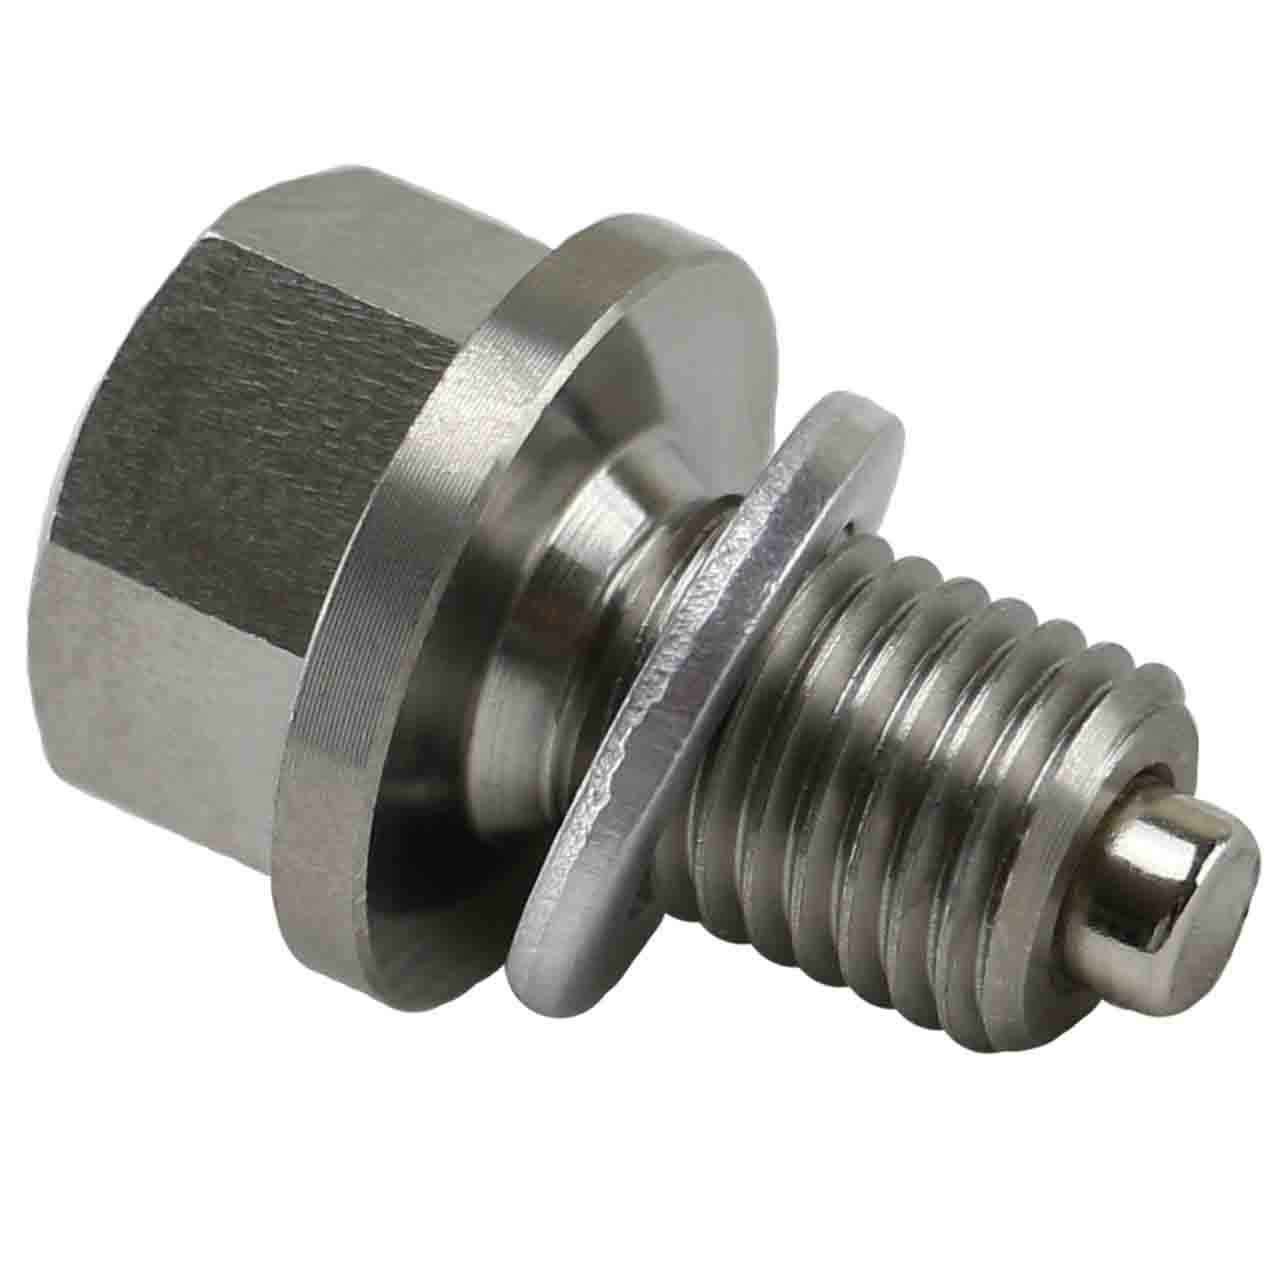 33-139-01-S for Kohler - Stainless Steel Magnetic Oil Drain Plug with Neodymium Magnet - Made In USA